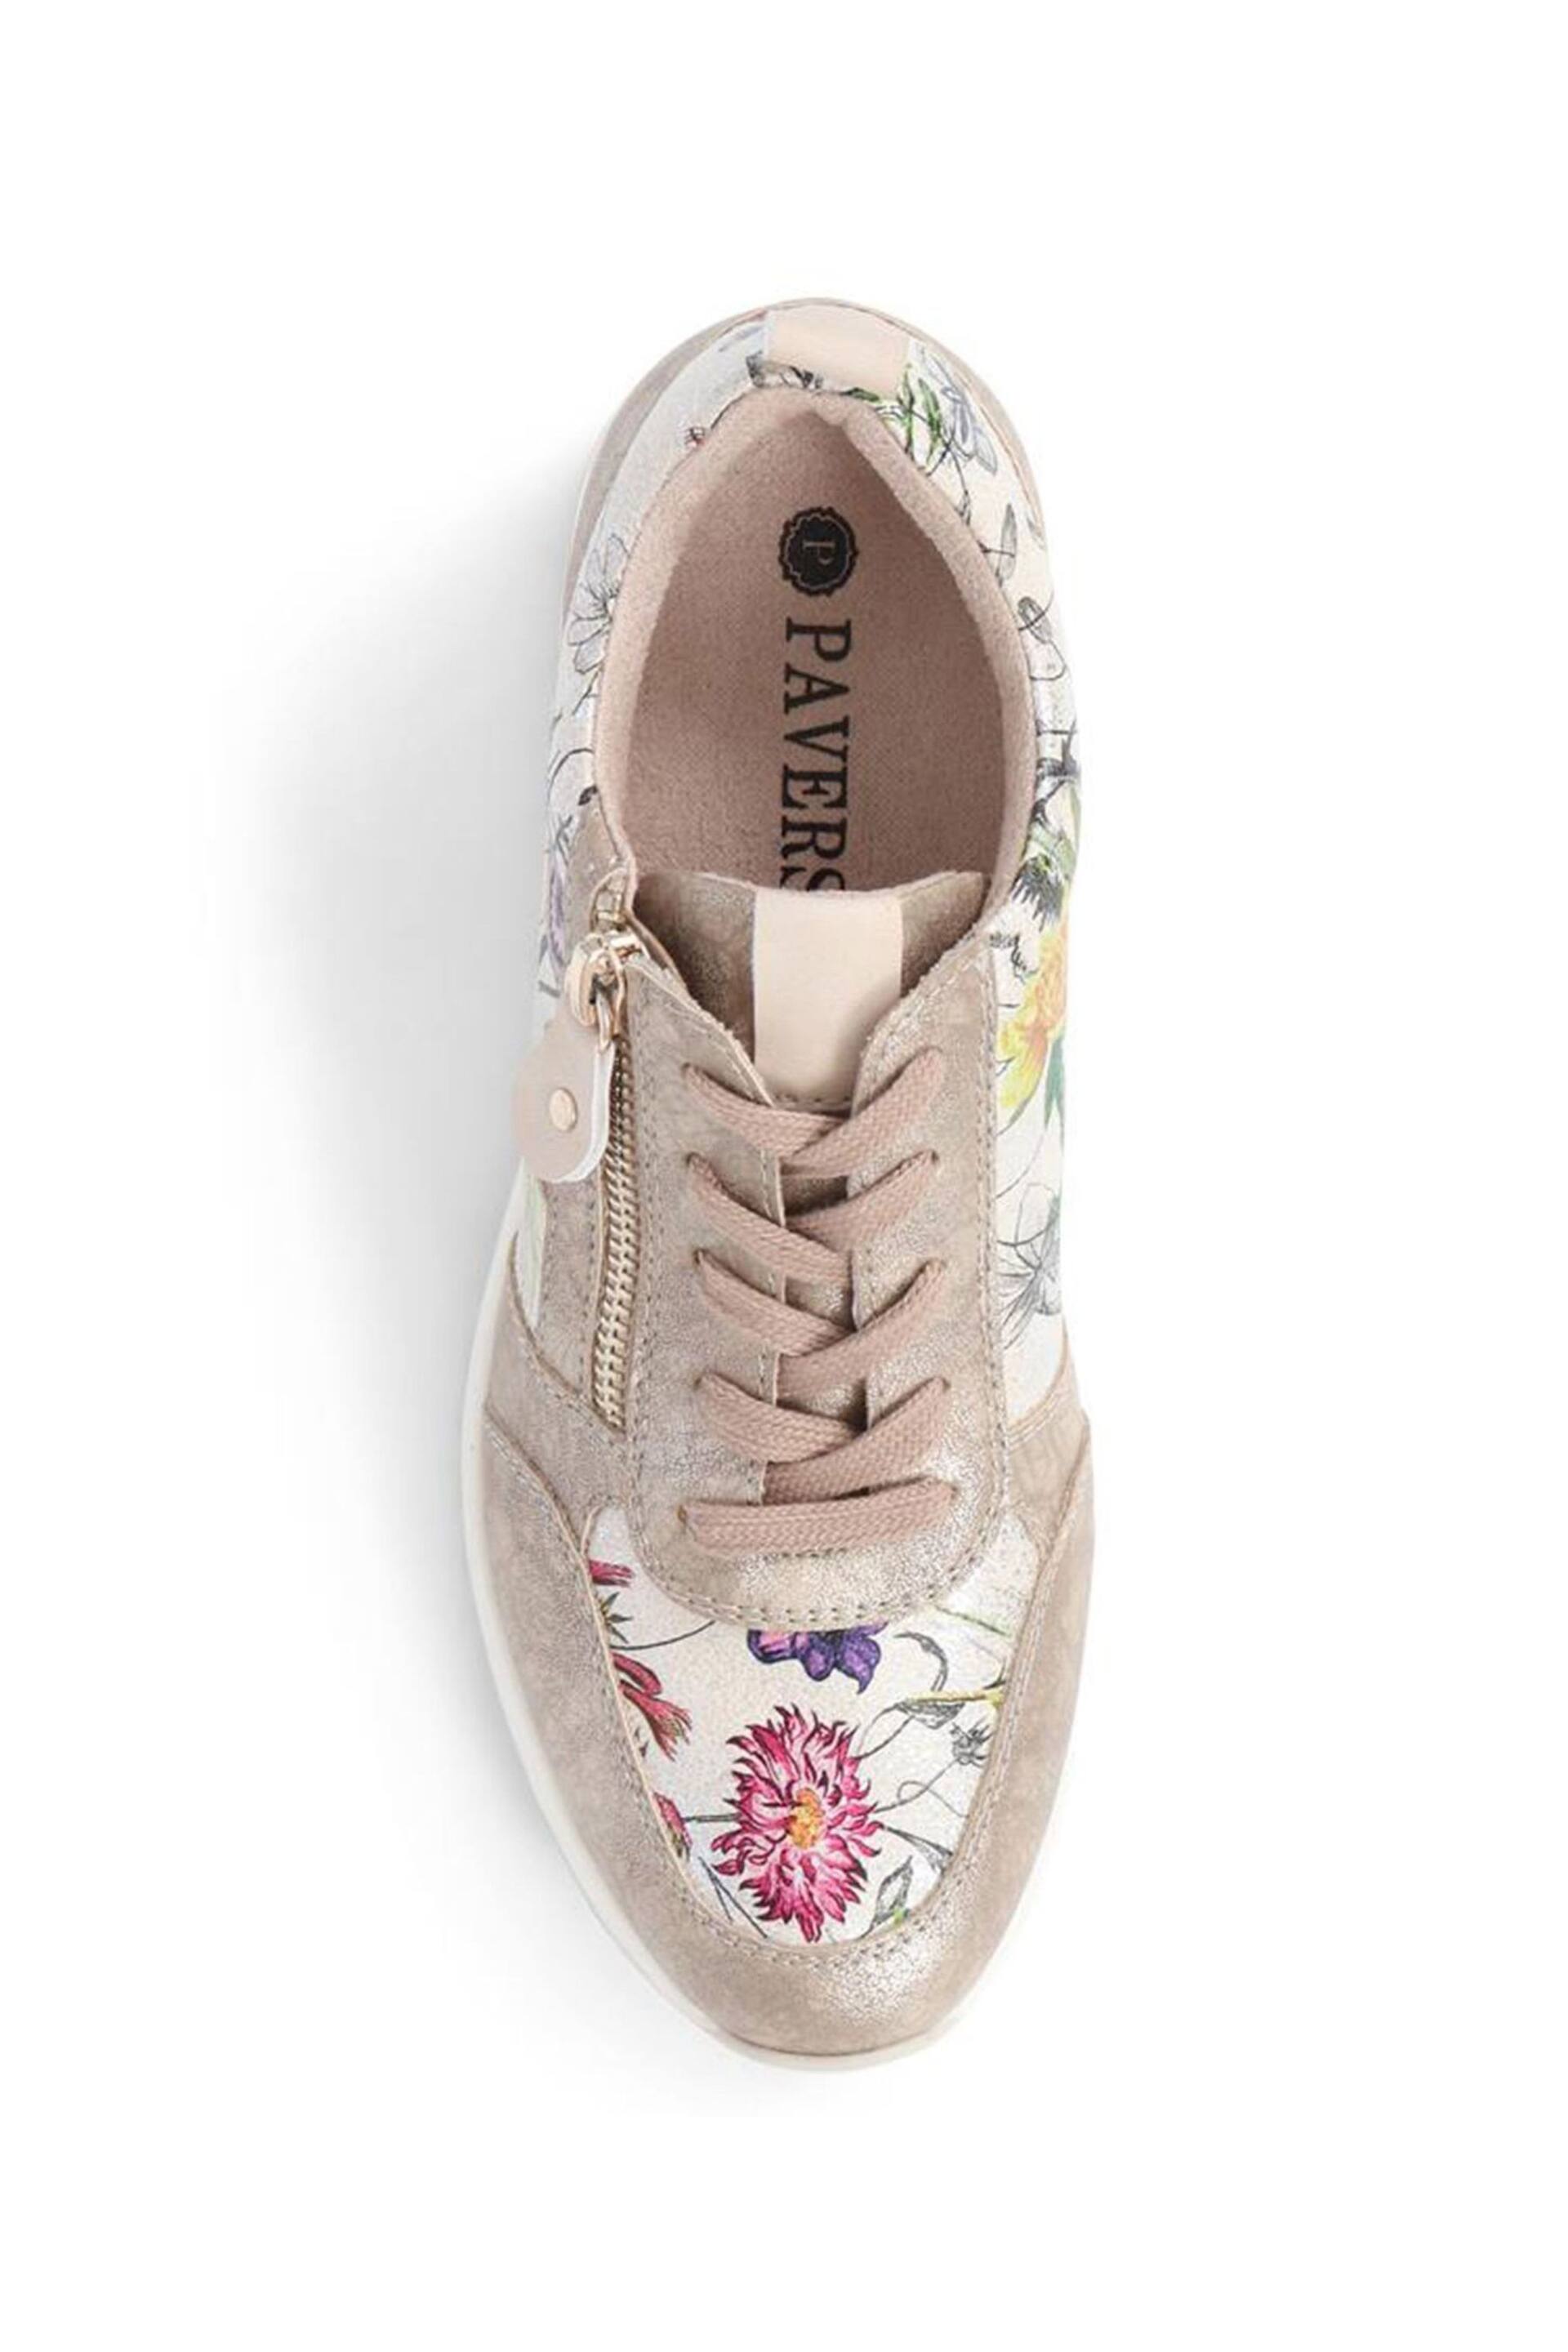 Pavers Gold Floral Accent Cushioned Sole Trainers - Image 4 of 5